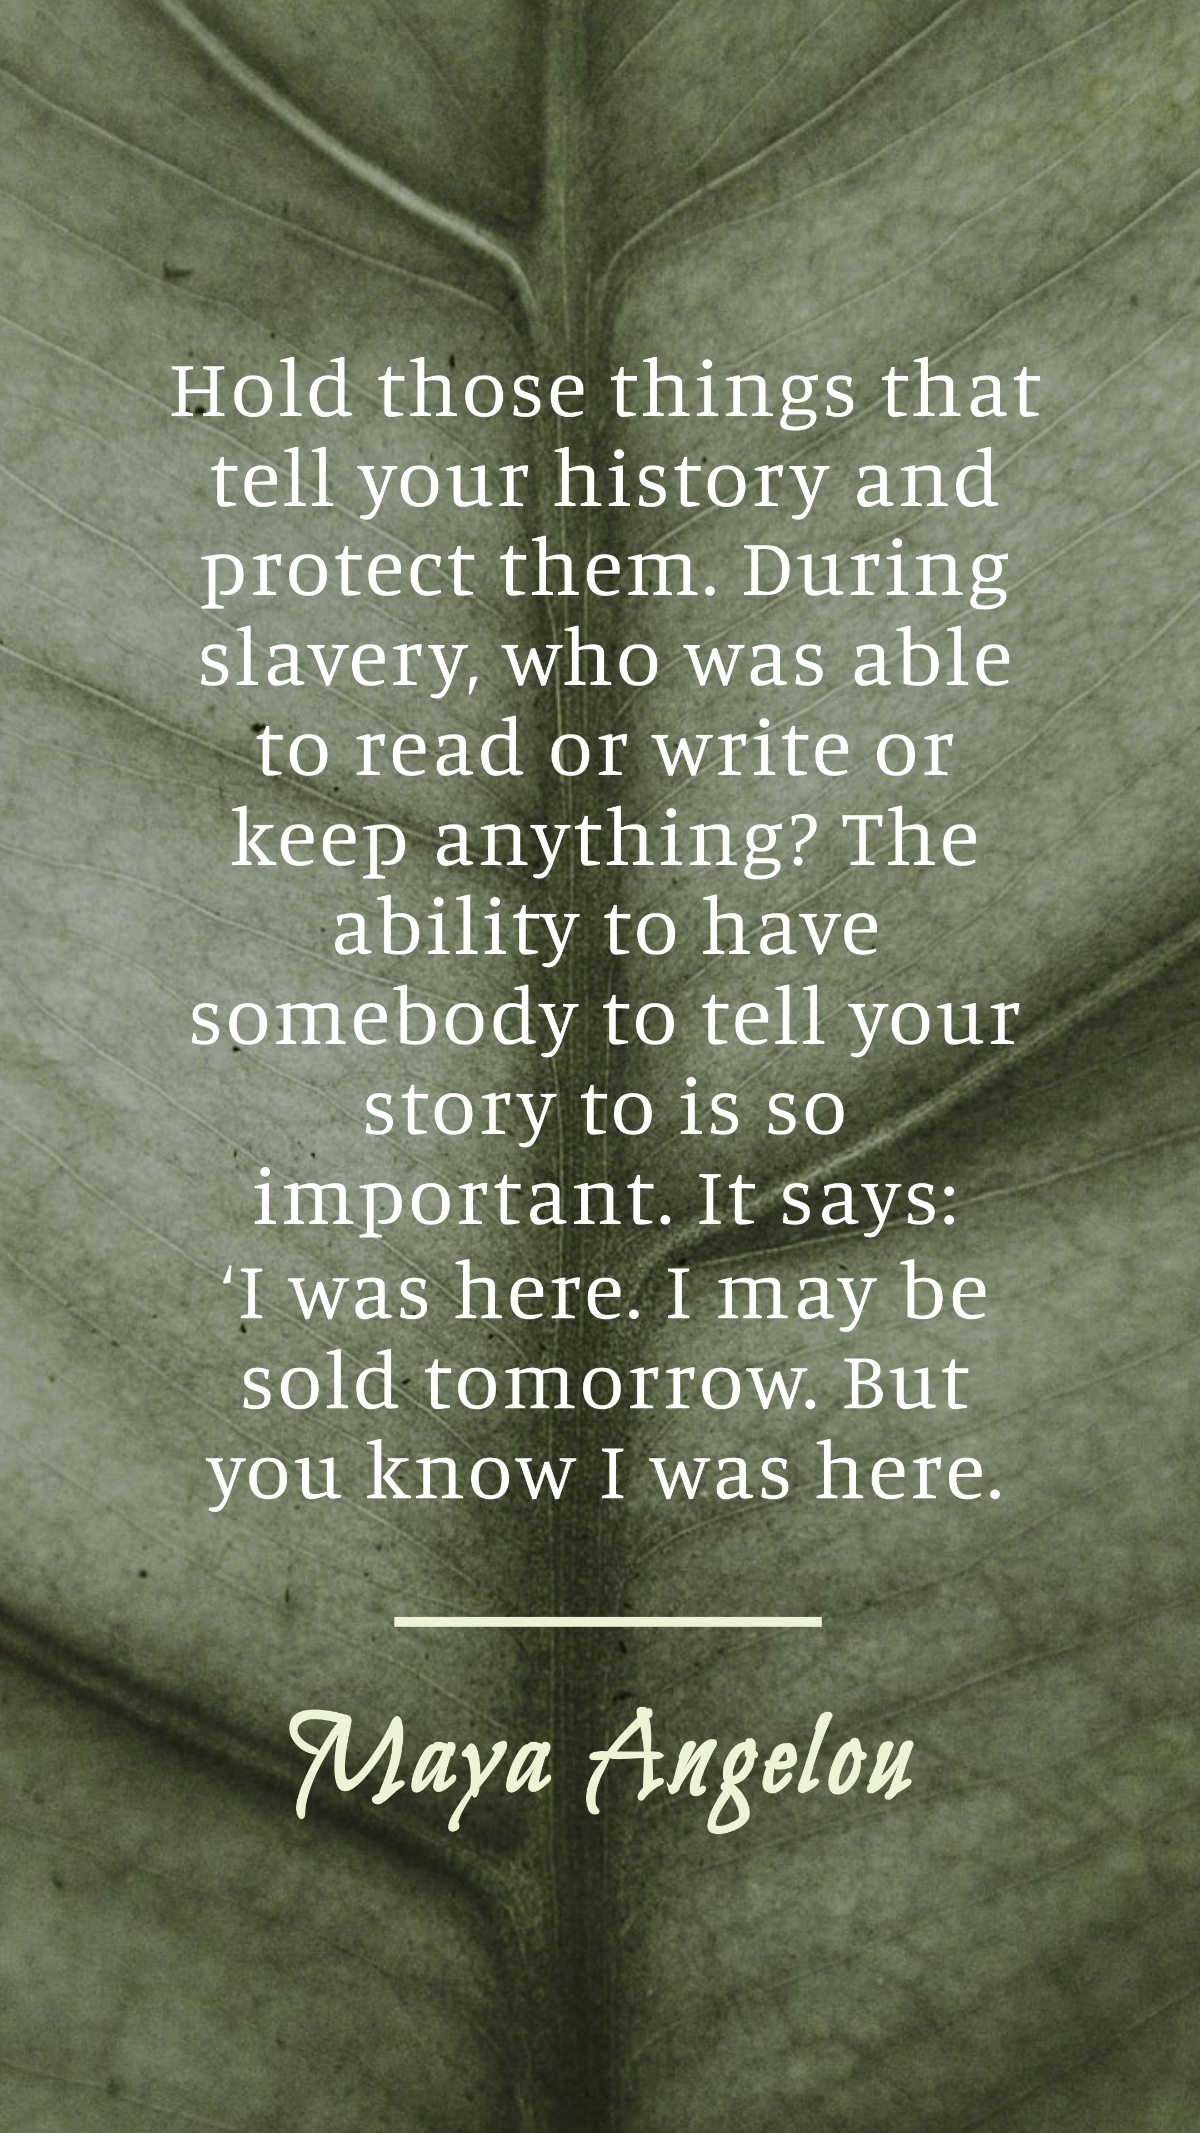 Maya Angelou - Hold those things that tell your history and protect them. During slavery, who was able to read or write or keep anything? The ability to have somebody to tell your story to is so impor